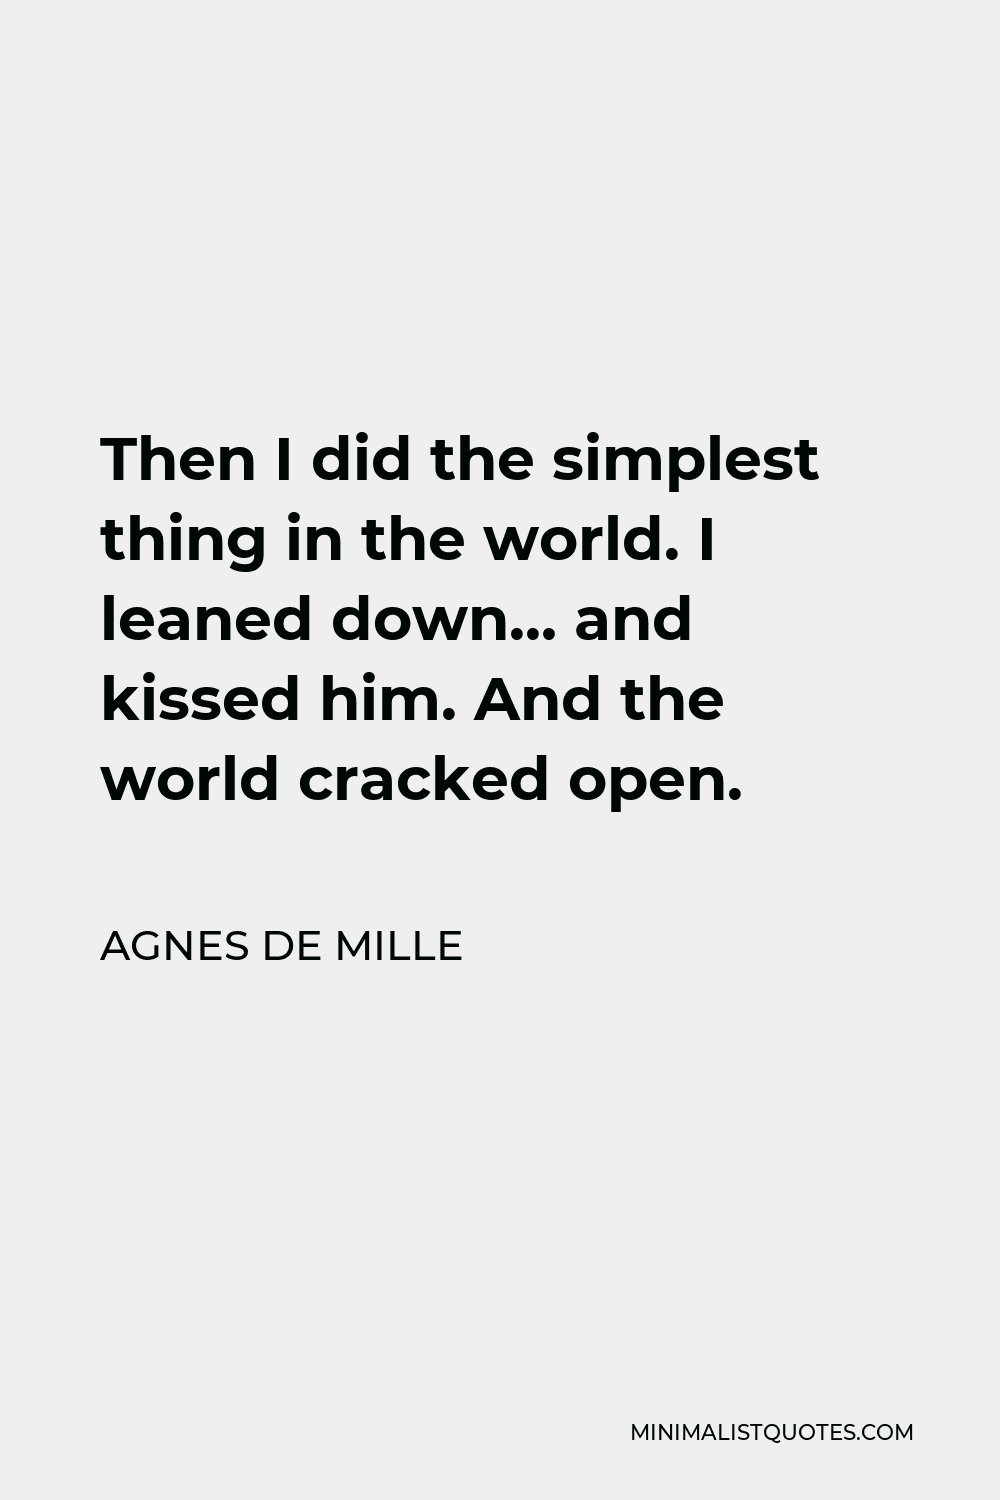 Agnes de Mille Quote - Then I did the simplest thing in the world. I leaned down… and kissed him. And the world cracked open.